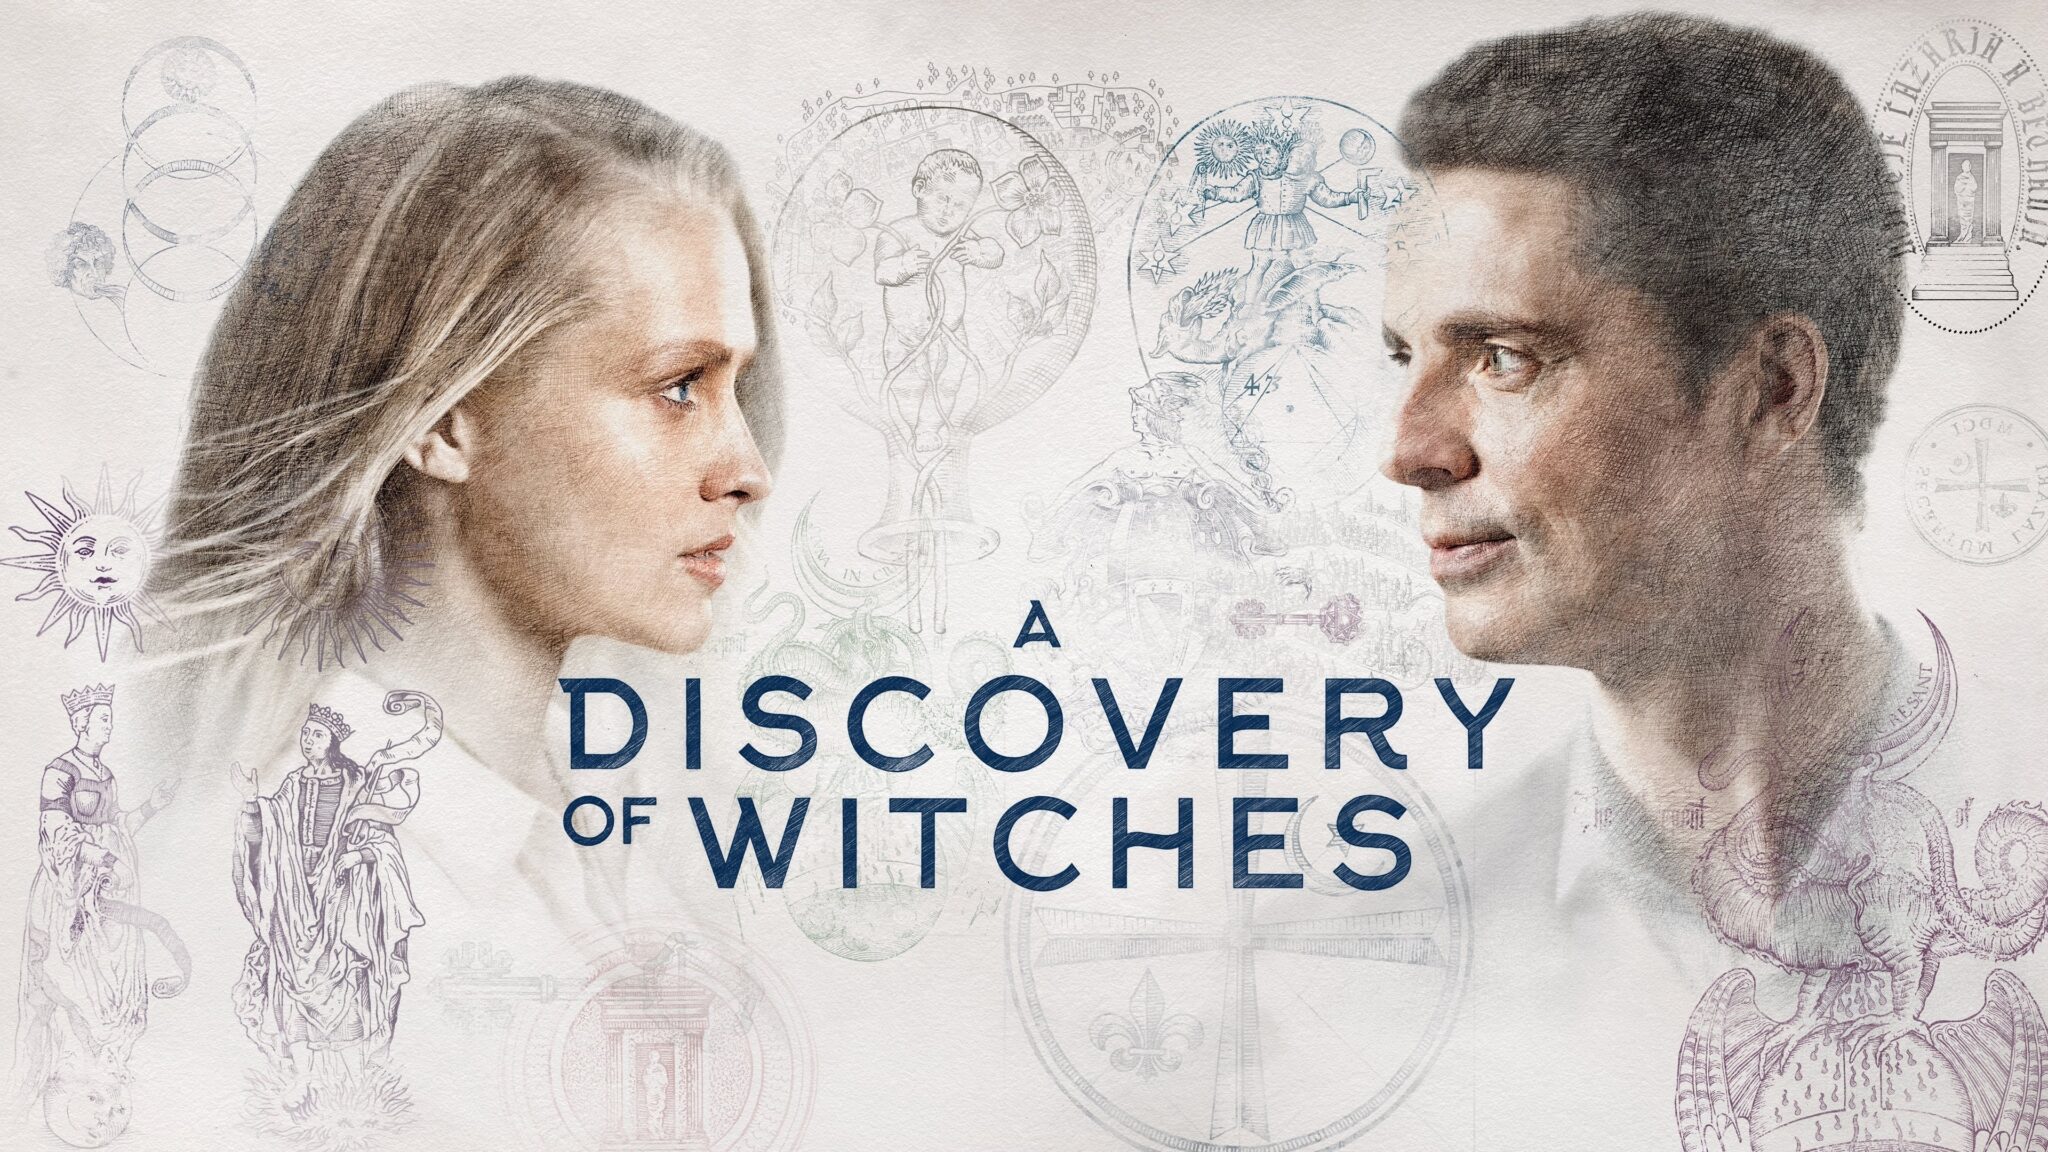 'A Discovery of Witches' season 2 episode 1 - Release Date, Watch